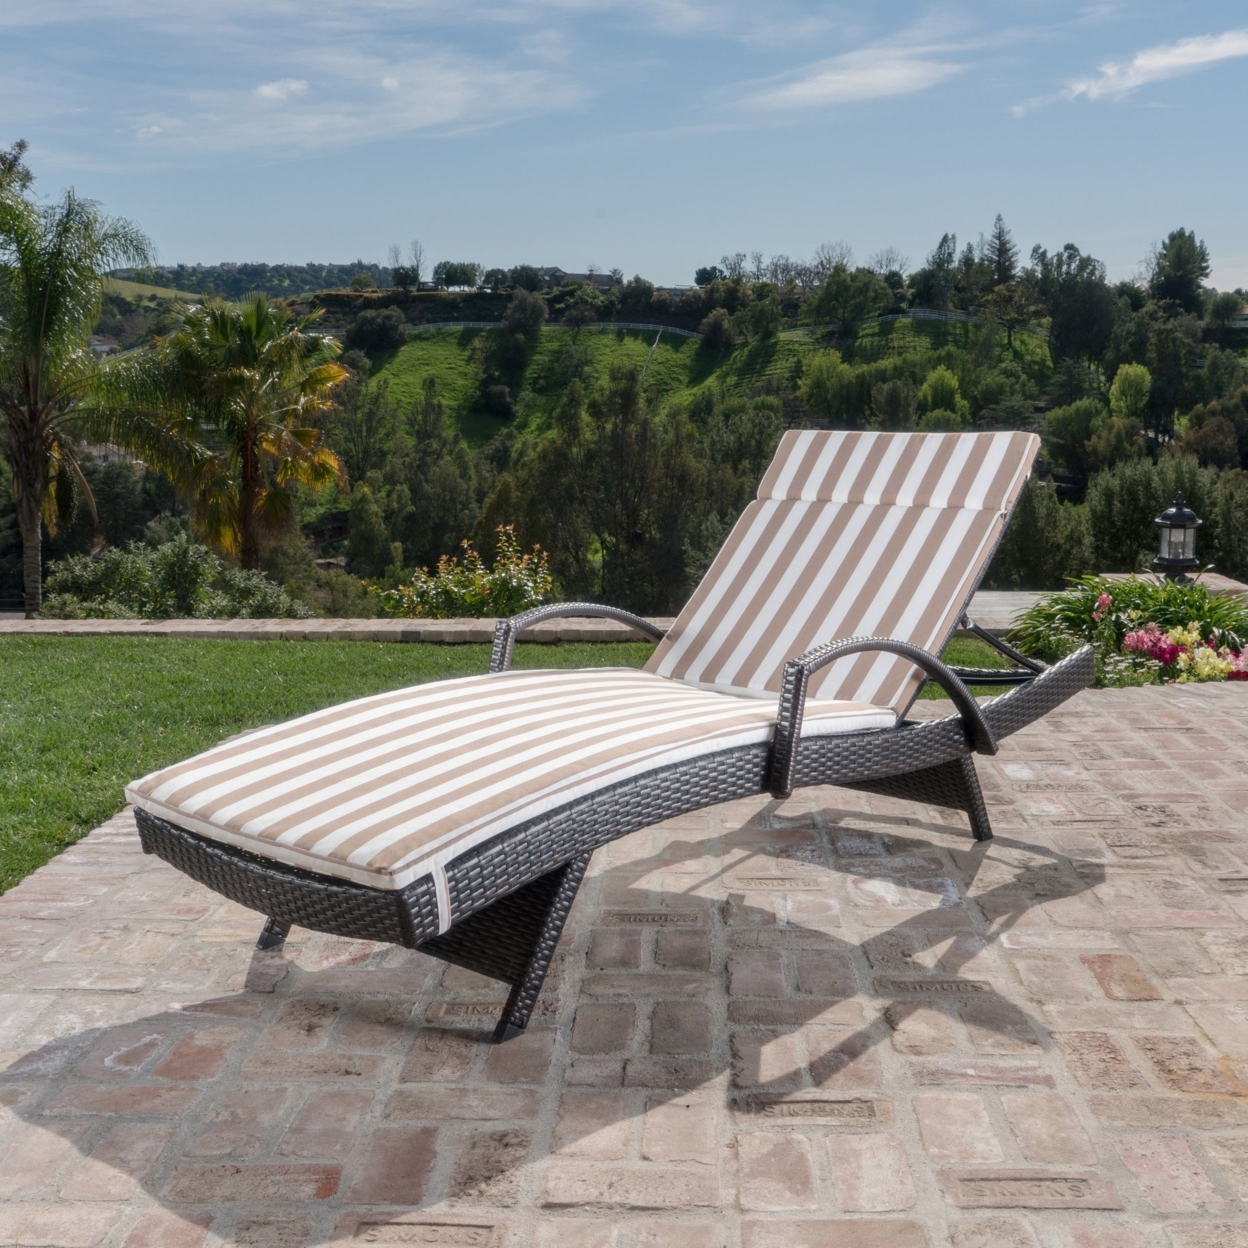 Lakeport Outdoor Wicker Lounge With Water Resistant Cushion - Brown & White Stripes